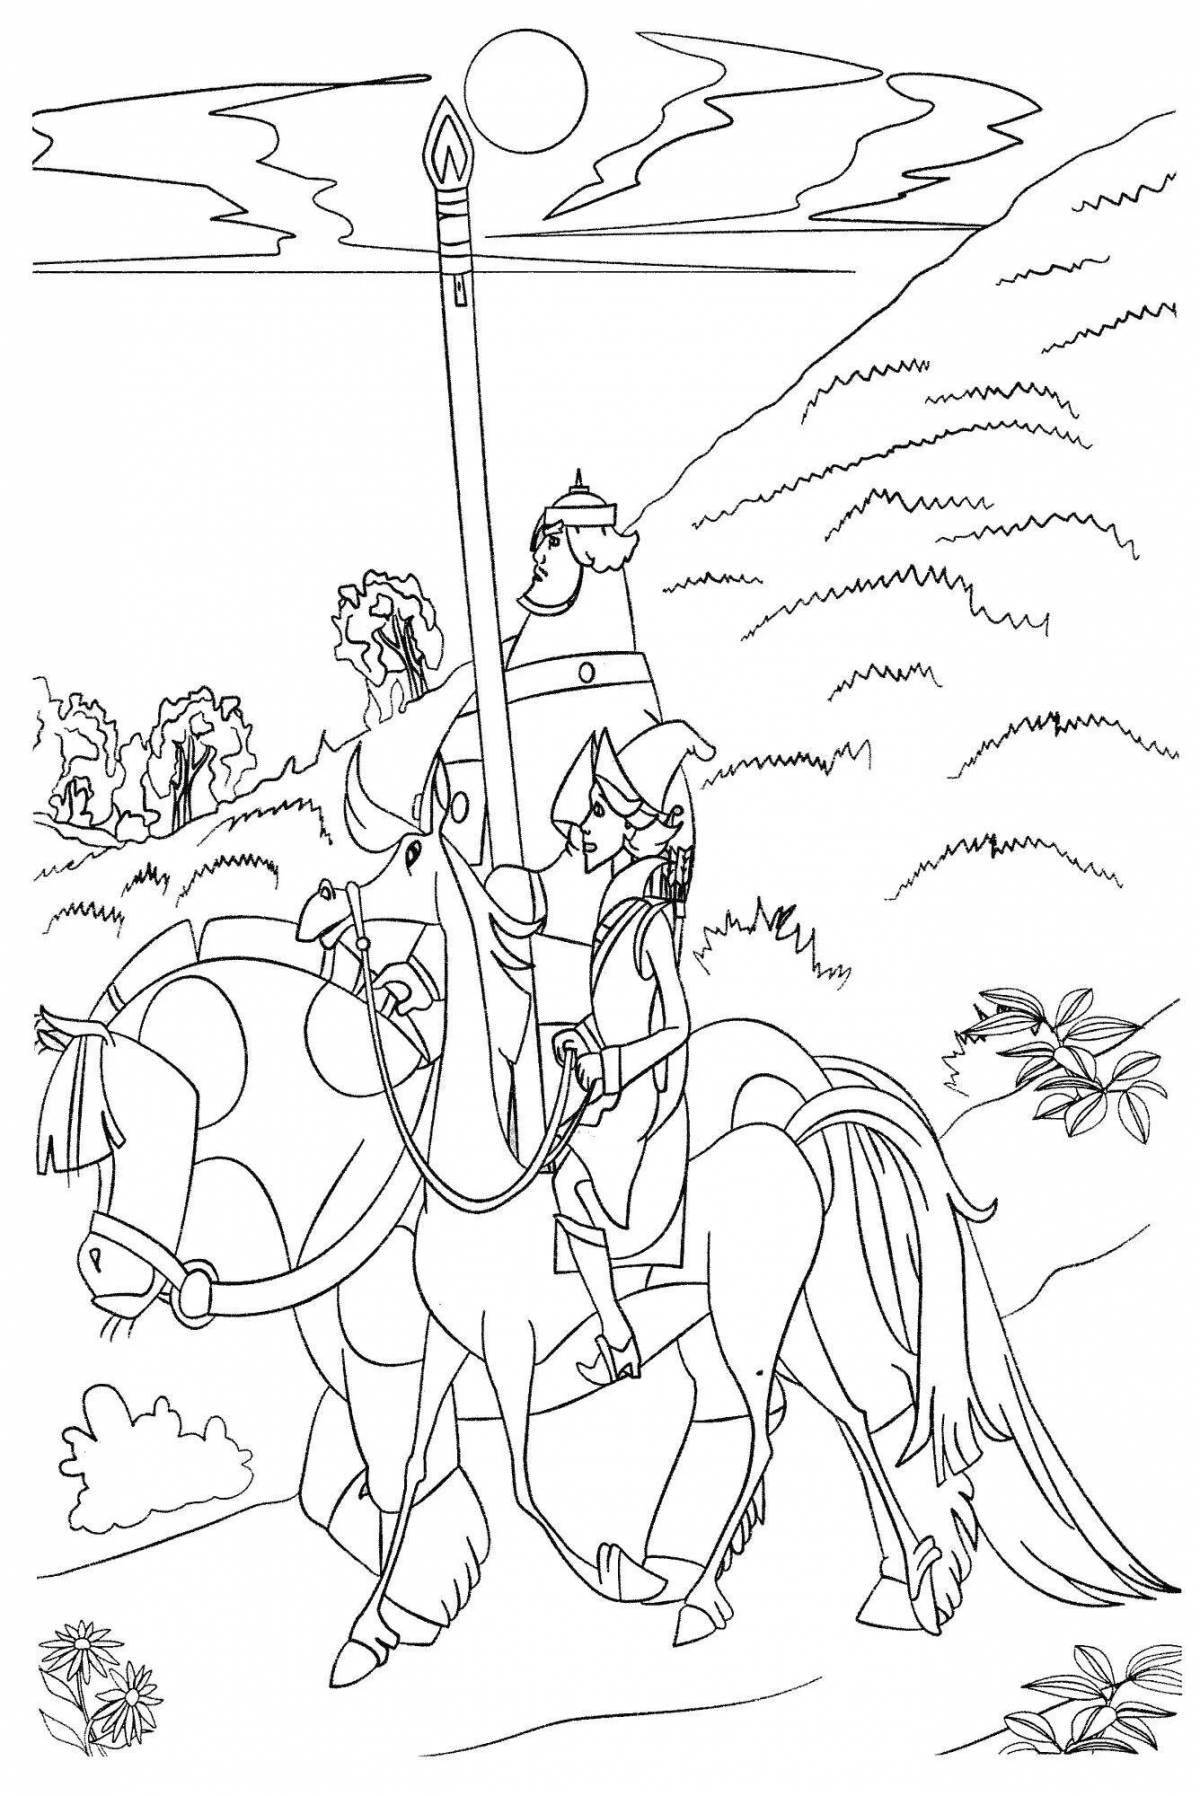 Coloring book Bogatyr Ilya Muromets on a horse